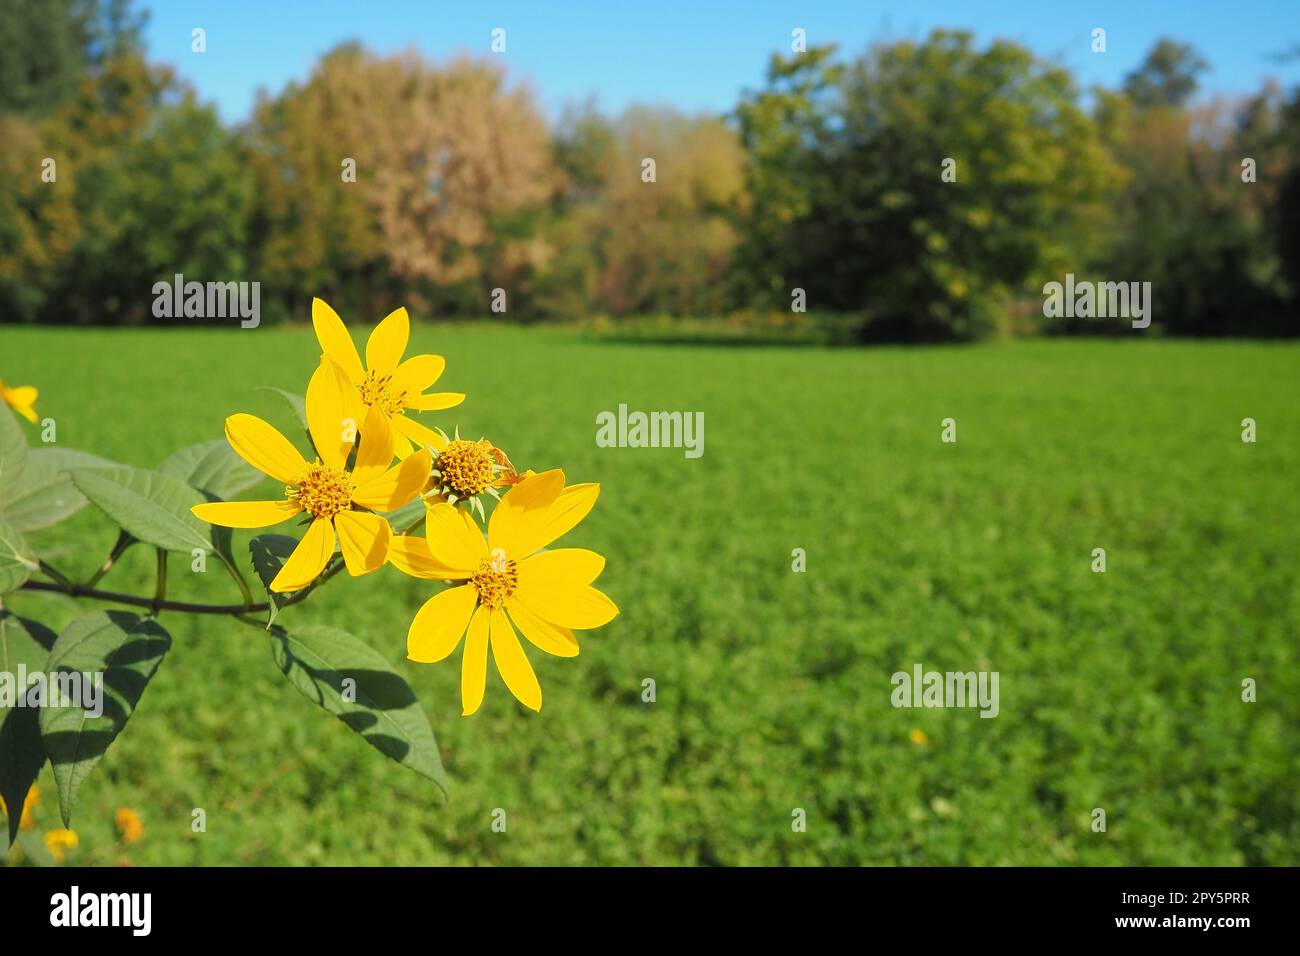 Jerusalem artichoke or tuberous sunflower, or ground pear Helianthus tuberosus is a species of perennial herbaceous tuberous plants of the genus Sunflower of the Asteraceae family. Yellow flowers. Stock Photo